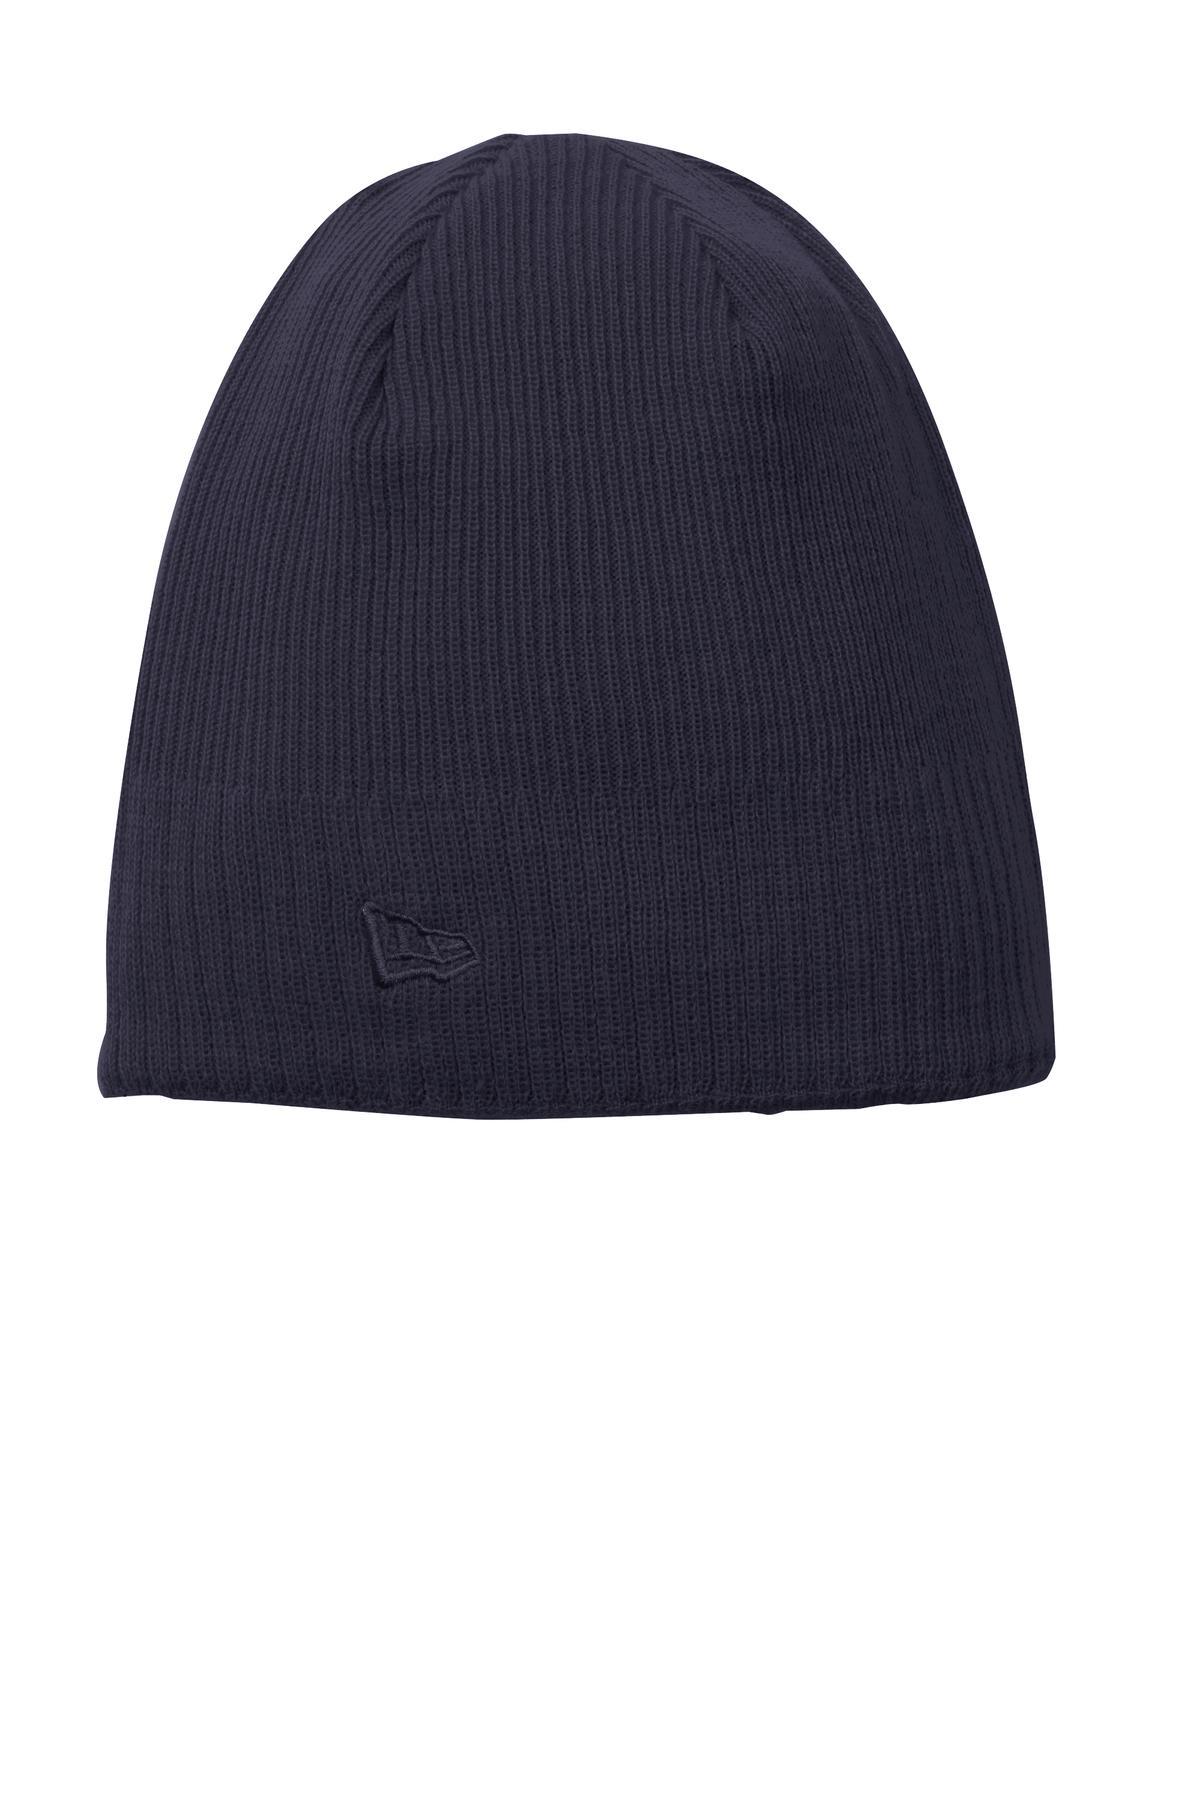 New Era Gathered Slouch Men's And Women's Beanie Hat Navy Blue OSFA 